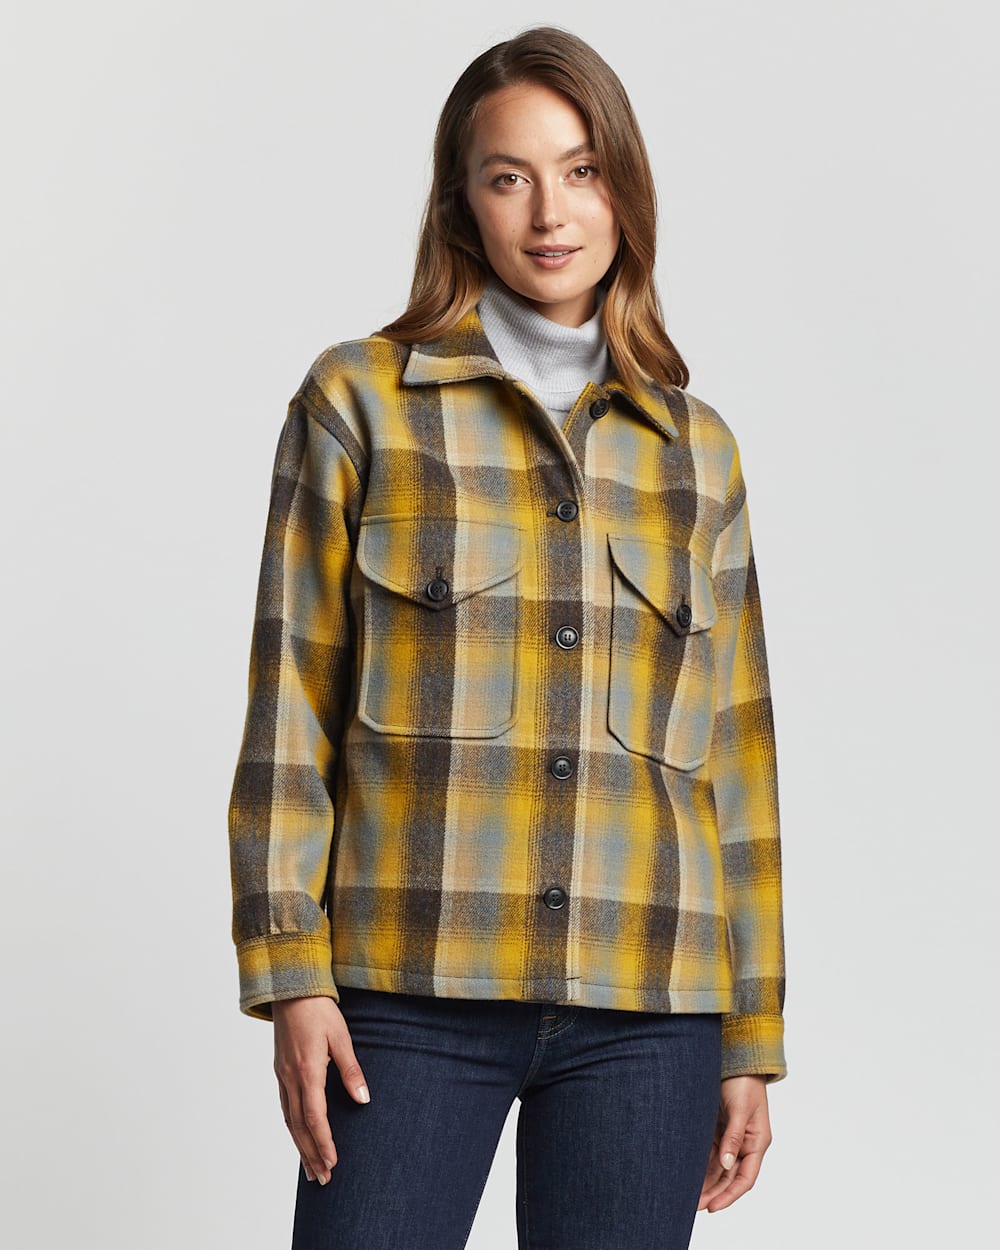 ALTERNATE VIEW OF WOMEN'S DYLAN WOOL JACKET IN YELLOW/NAVY PLAID image number 6